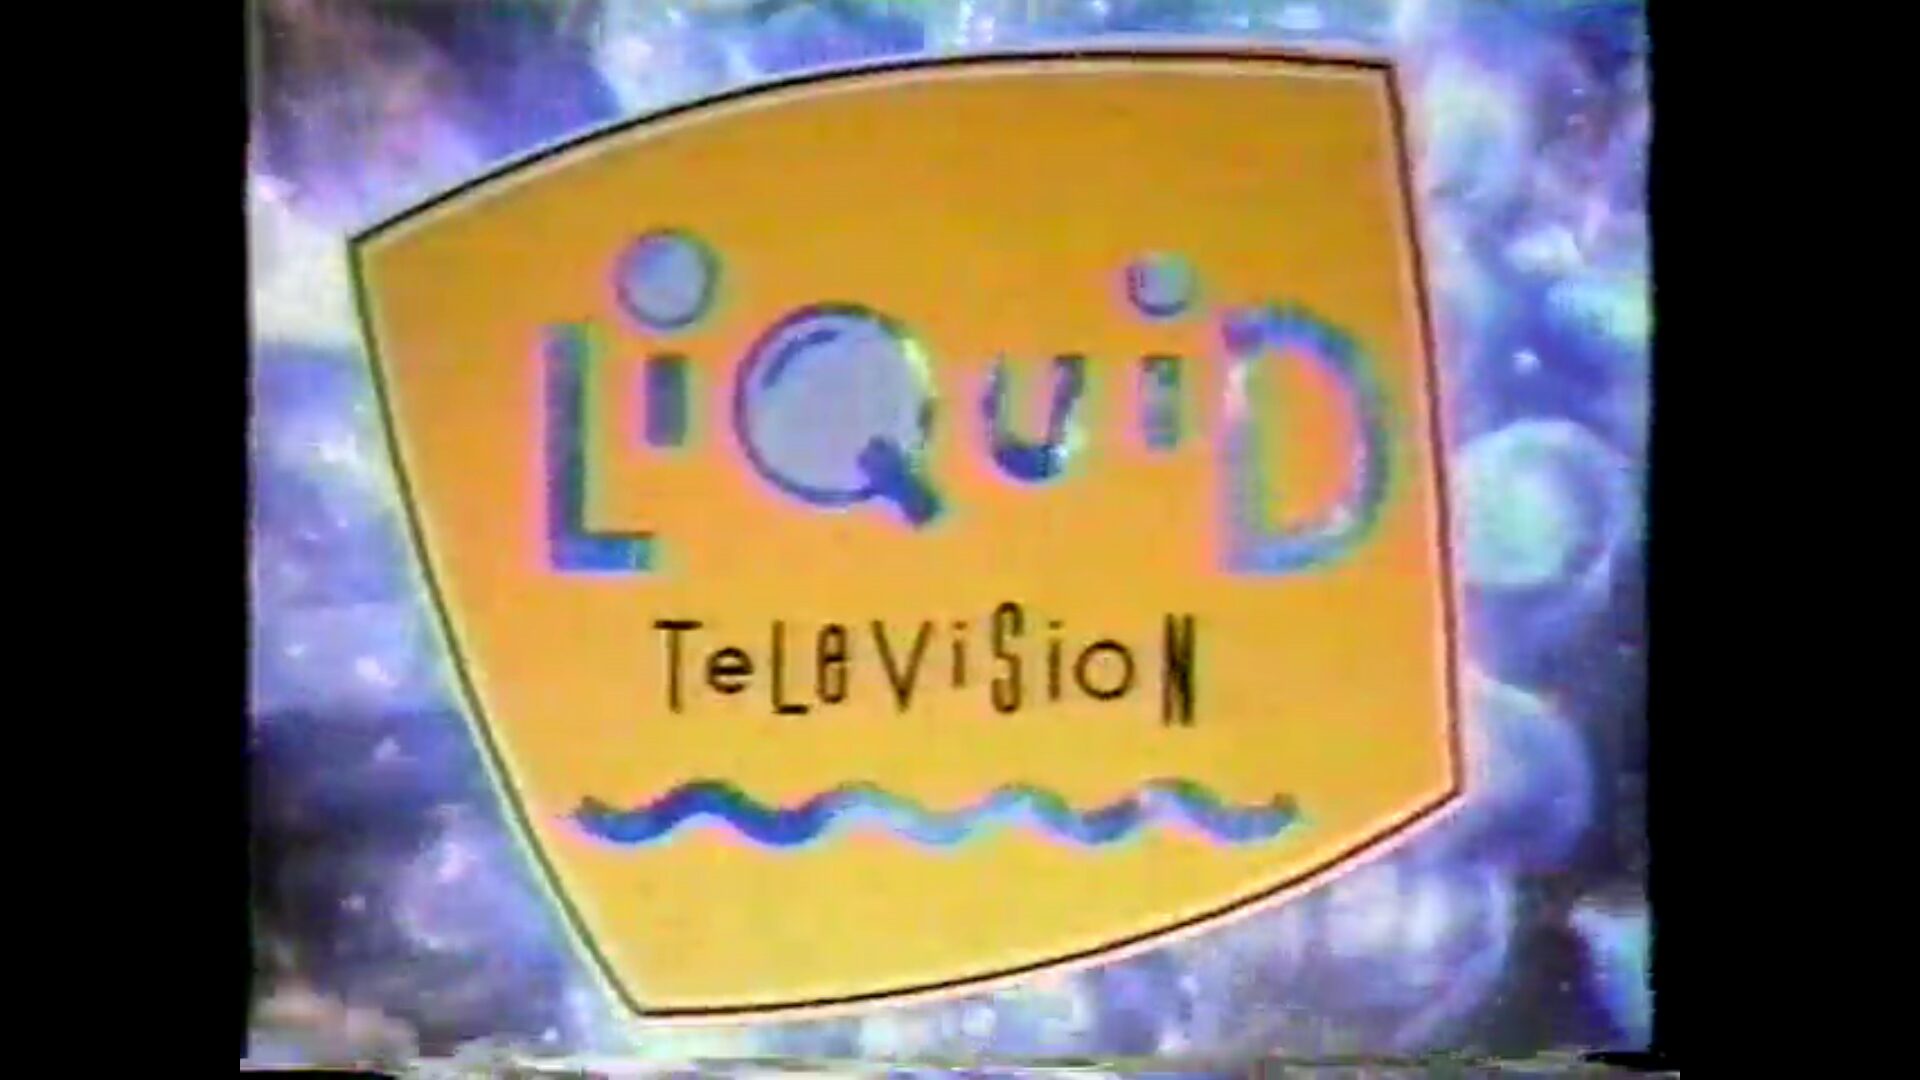 Praise be, for Liquid Television has been Archived